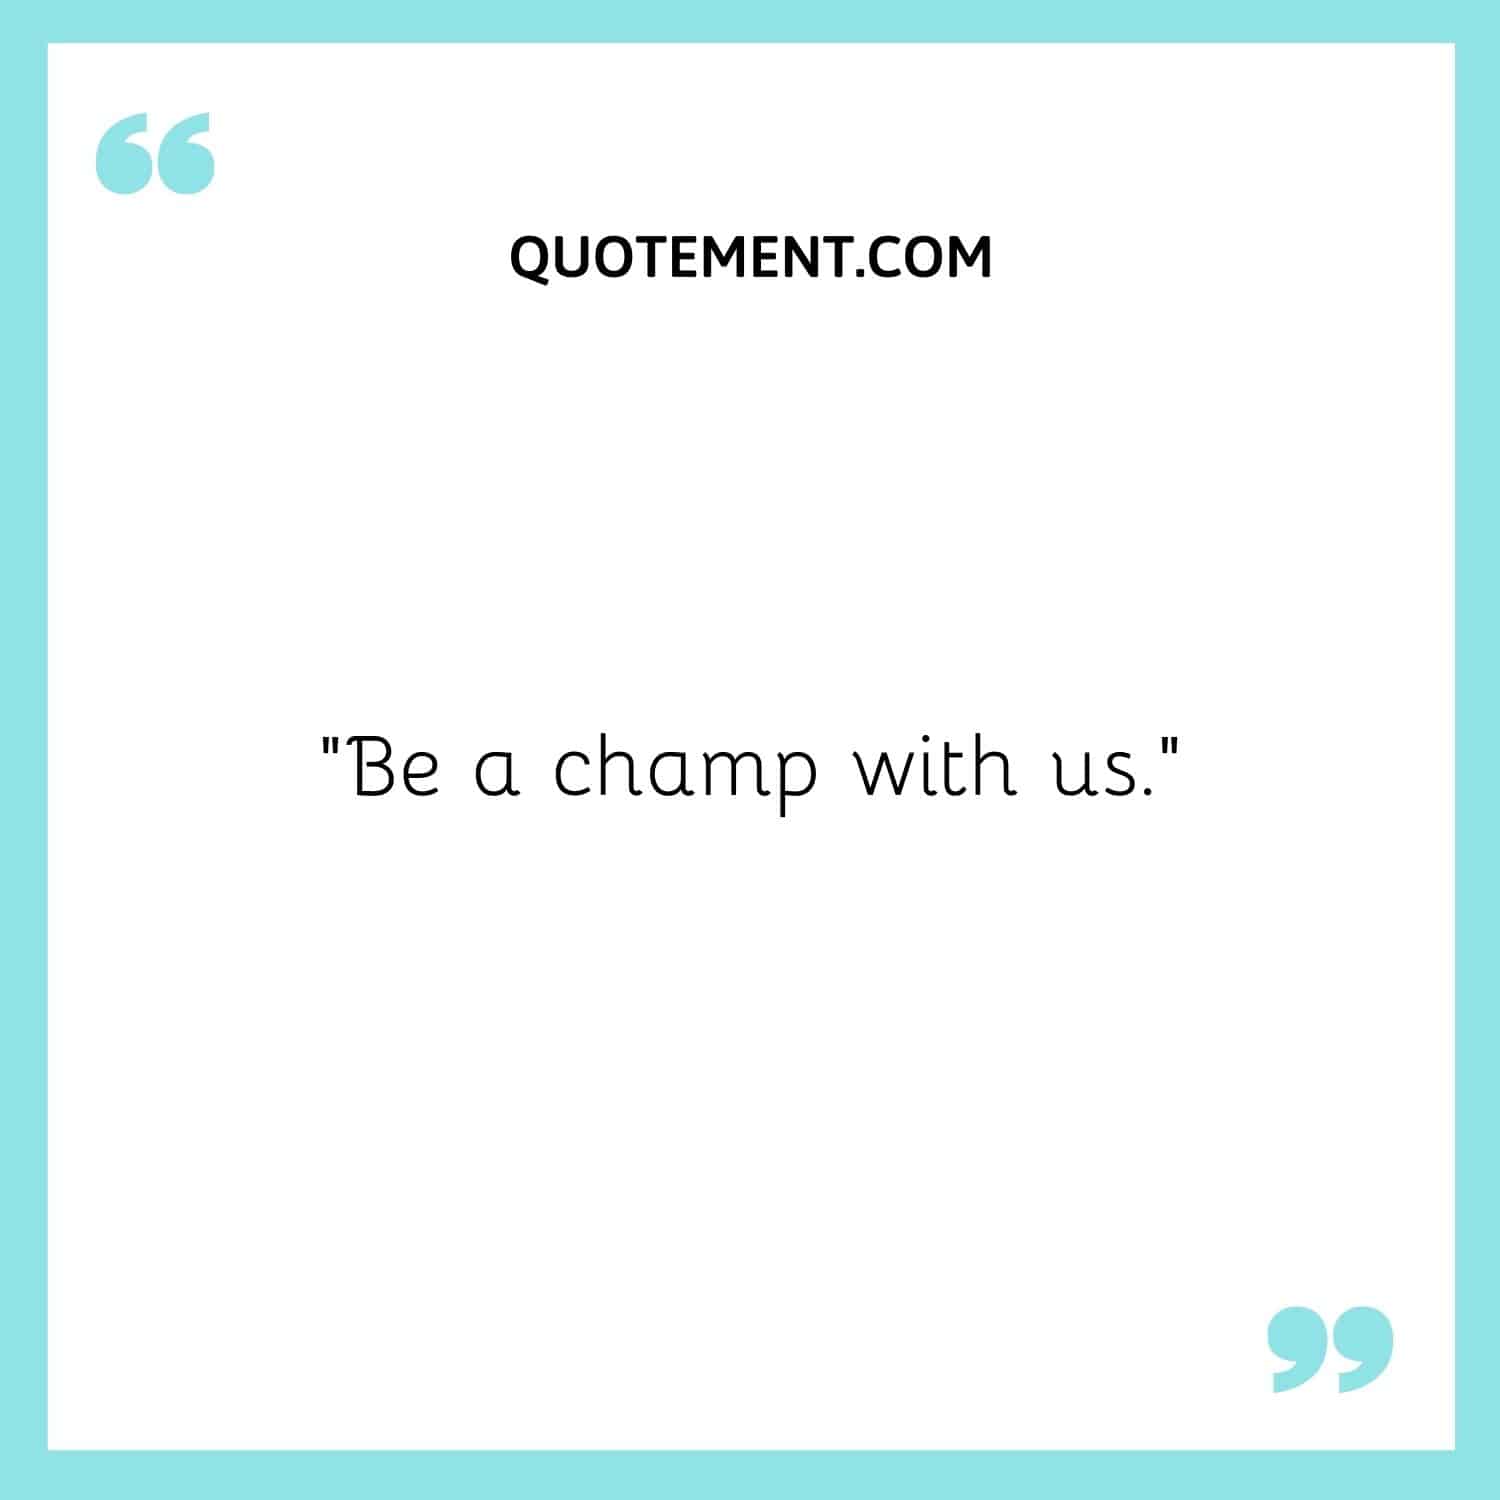 Be a champ with us.